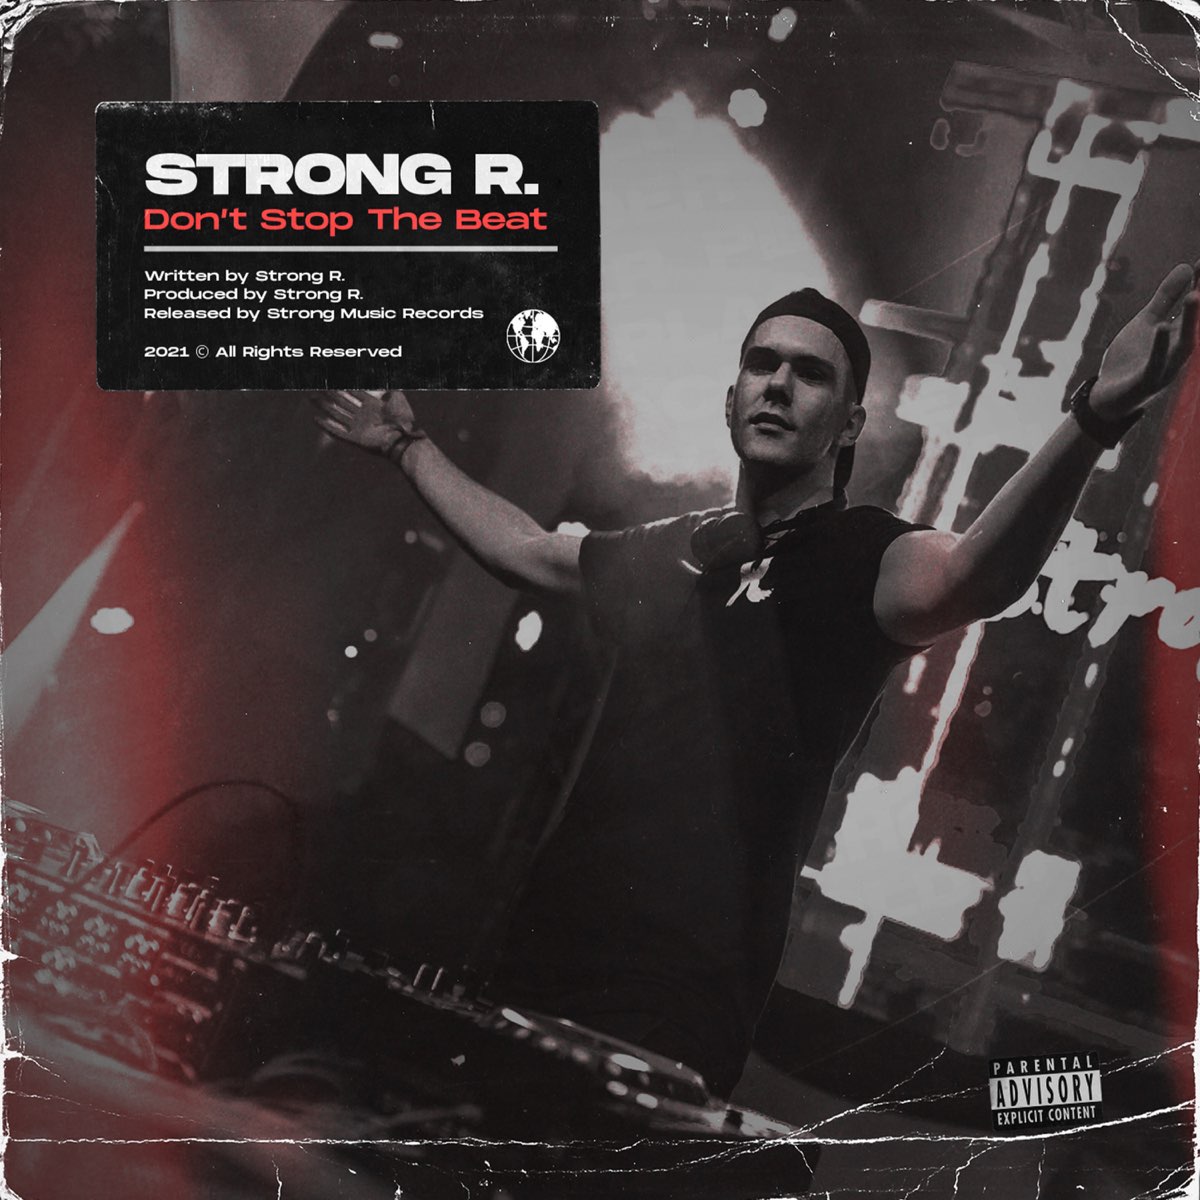 Don't Stop the Beat - Single by Strong R. on Apple Music